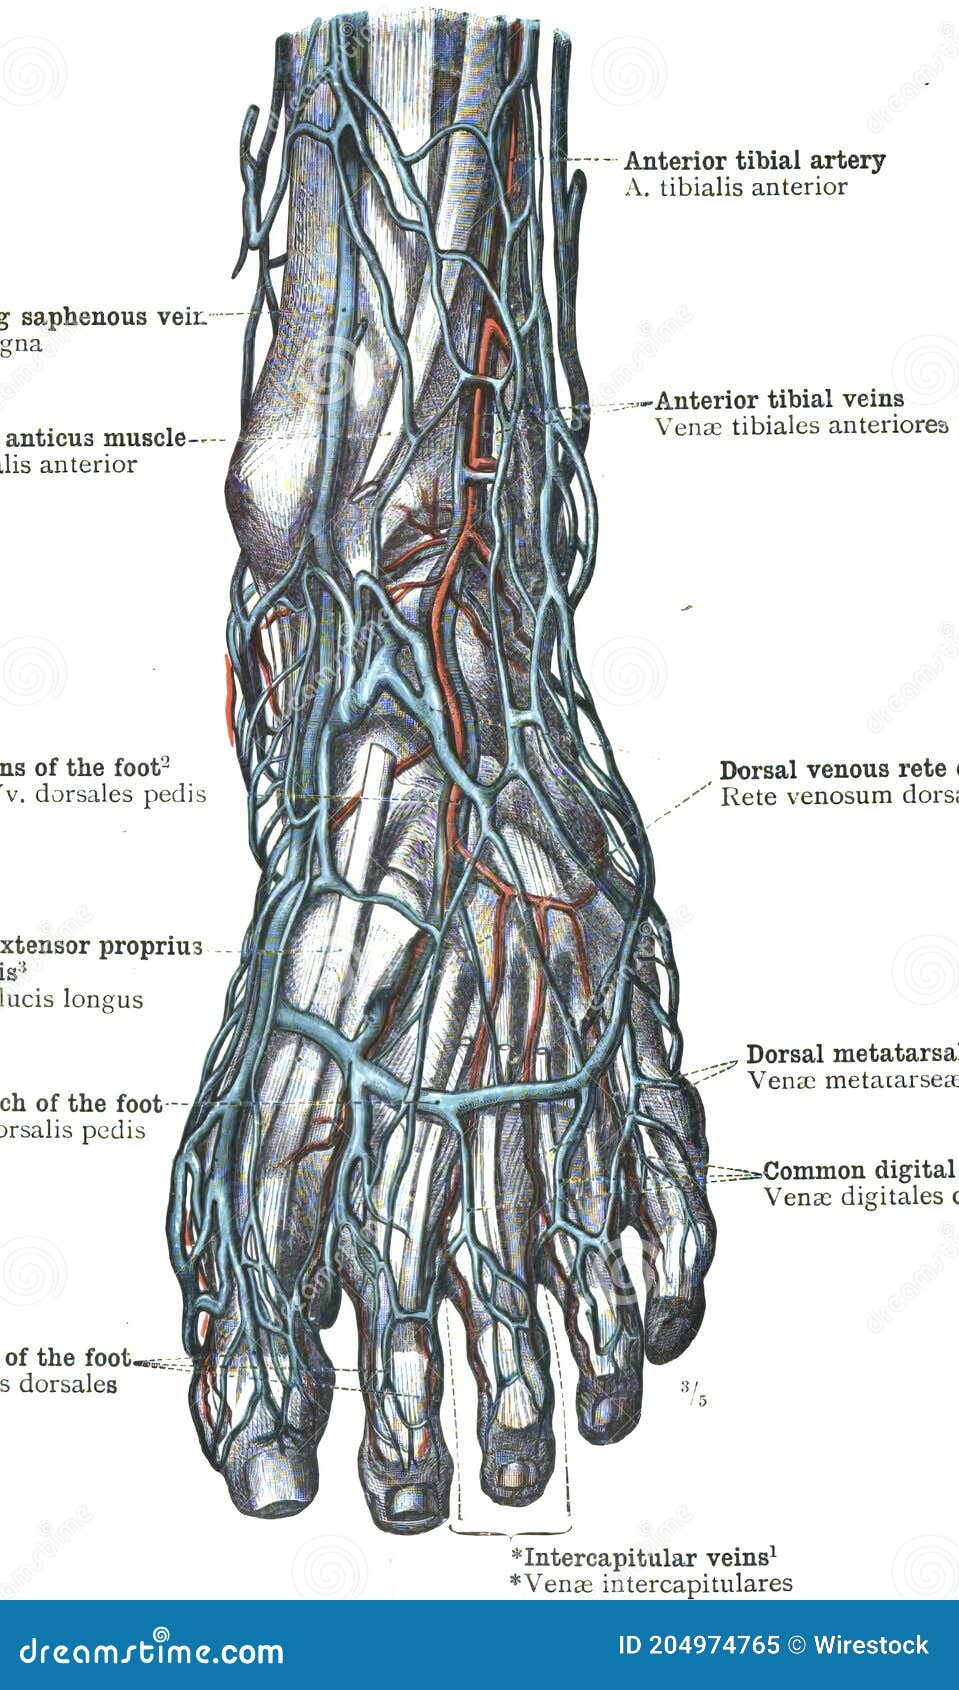 topography of arteries, and veins